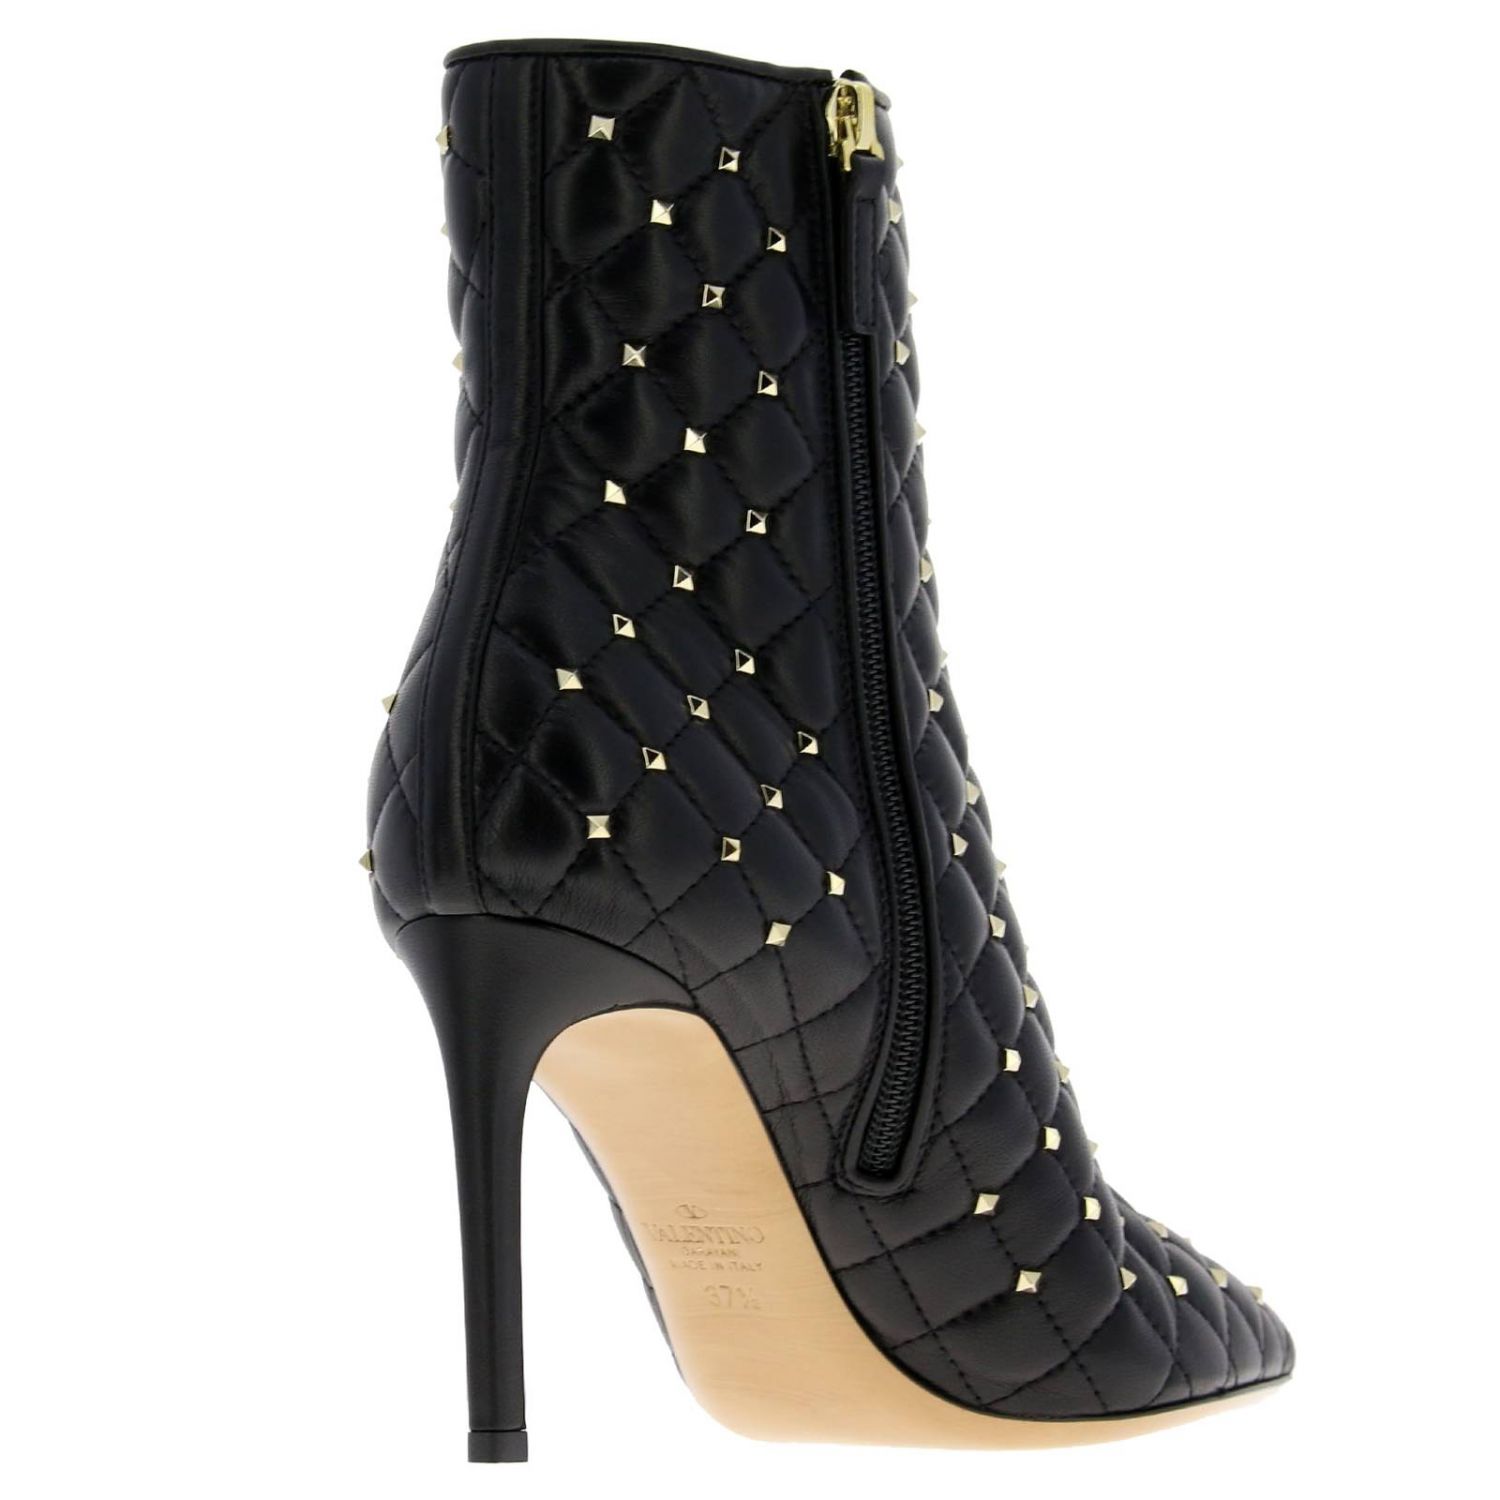 Valentino Rockstud Spike ankle boot in 